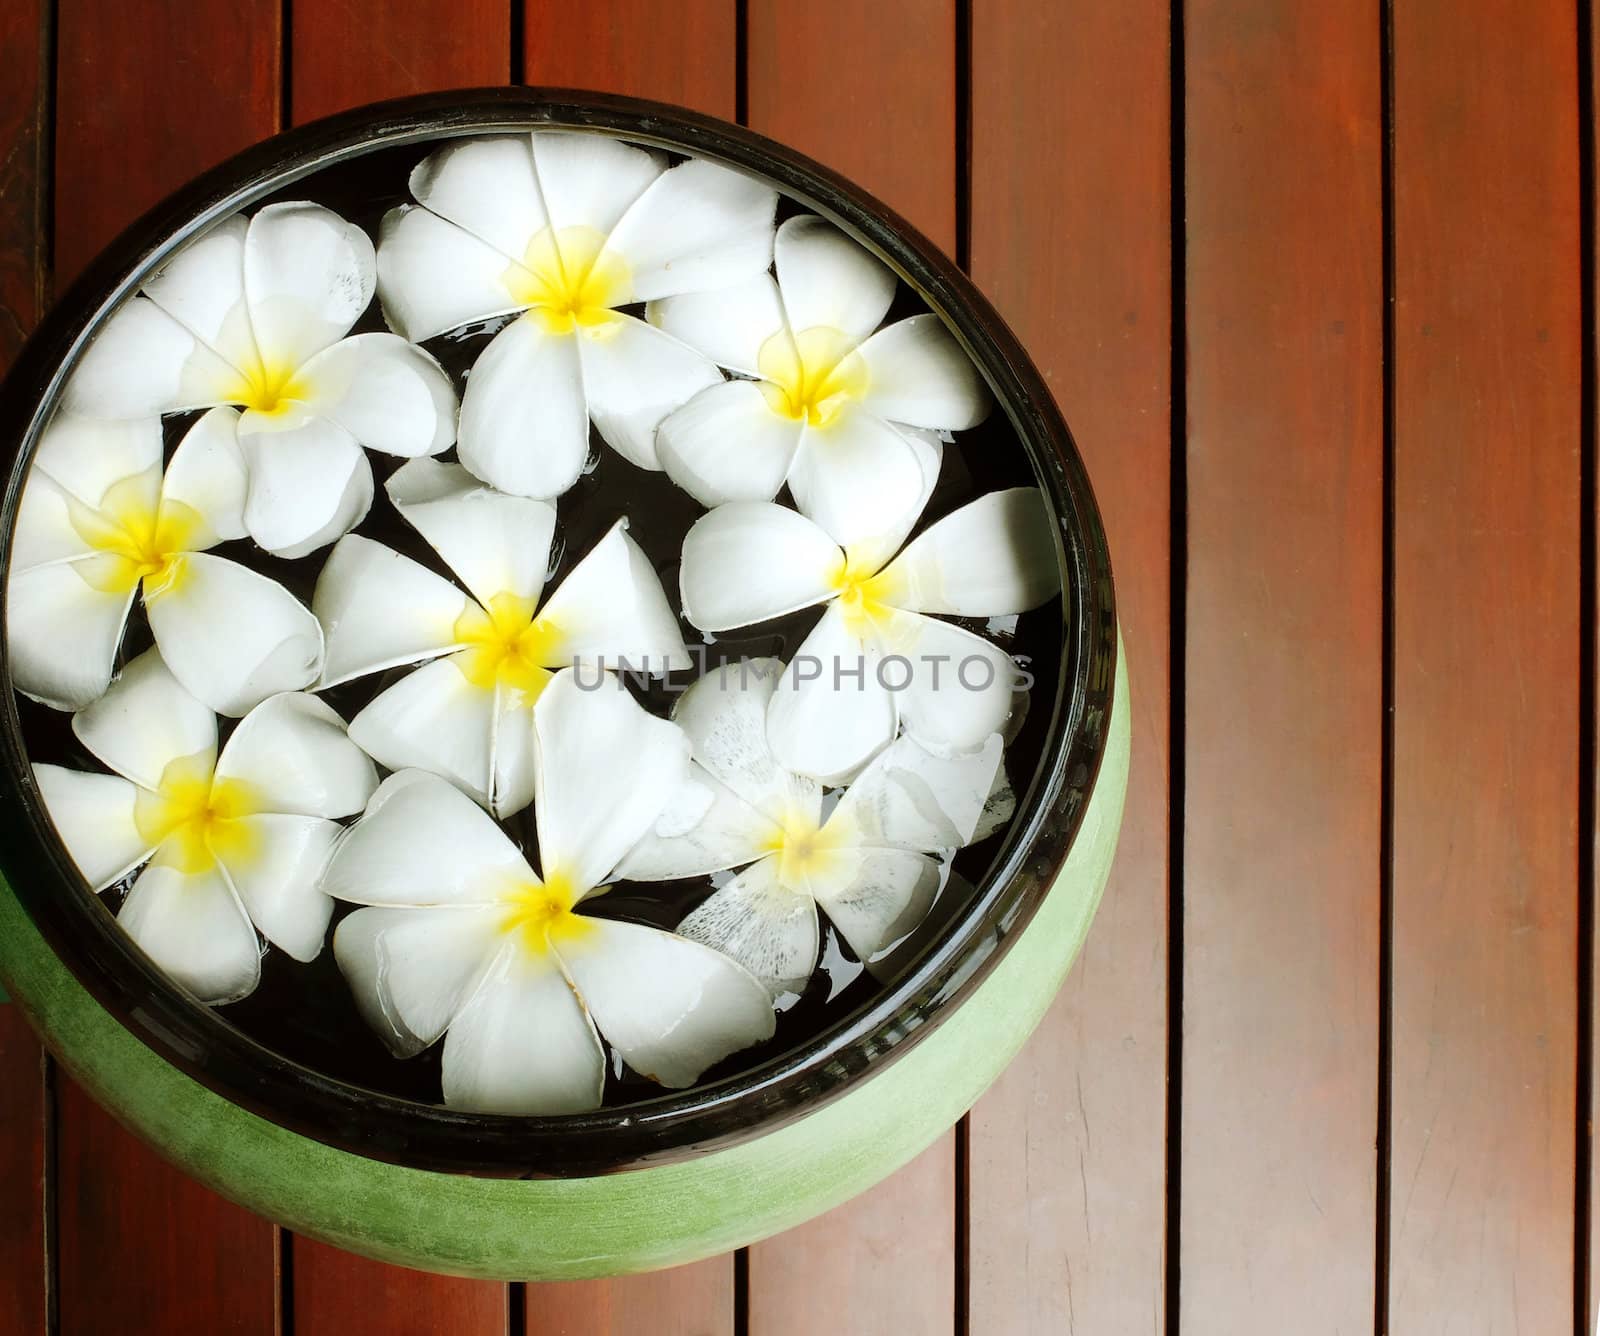 Frangipani flowers floating in the ancient bowl  by nuchylee